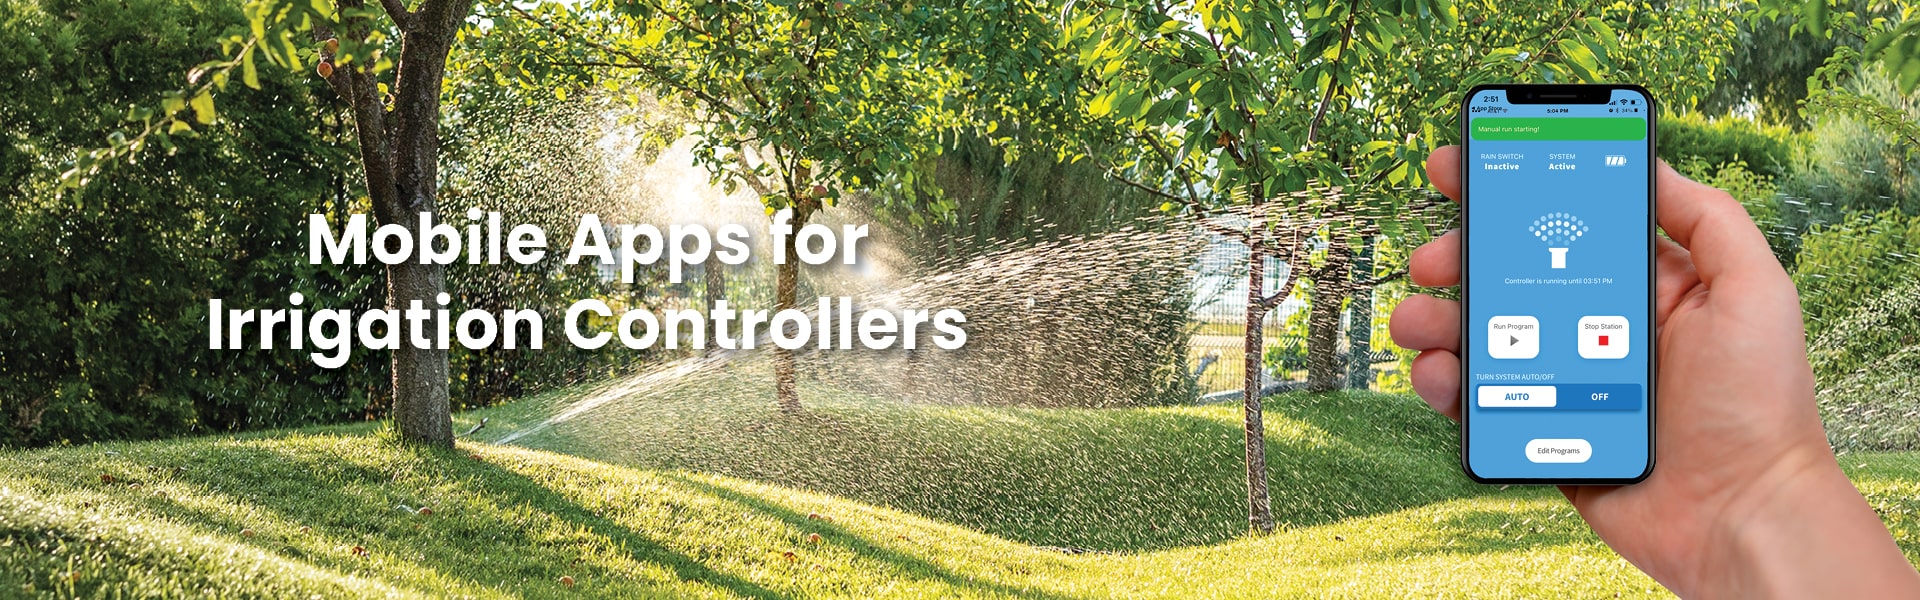 Mobile Apps for Irrigation Controllers